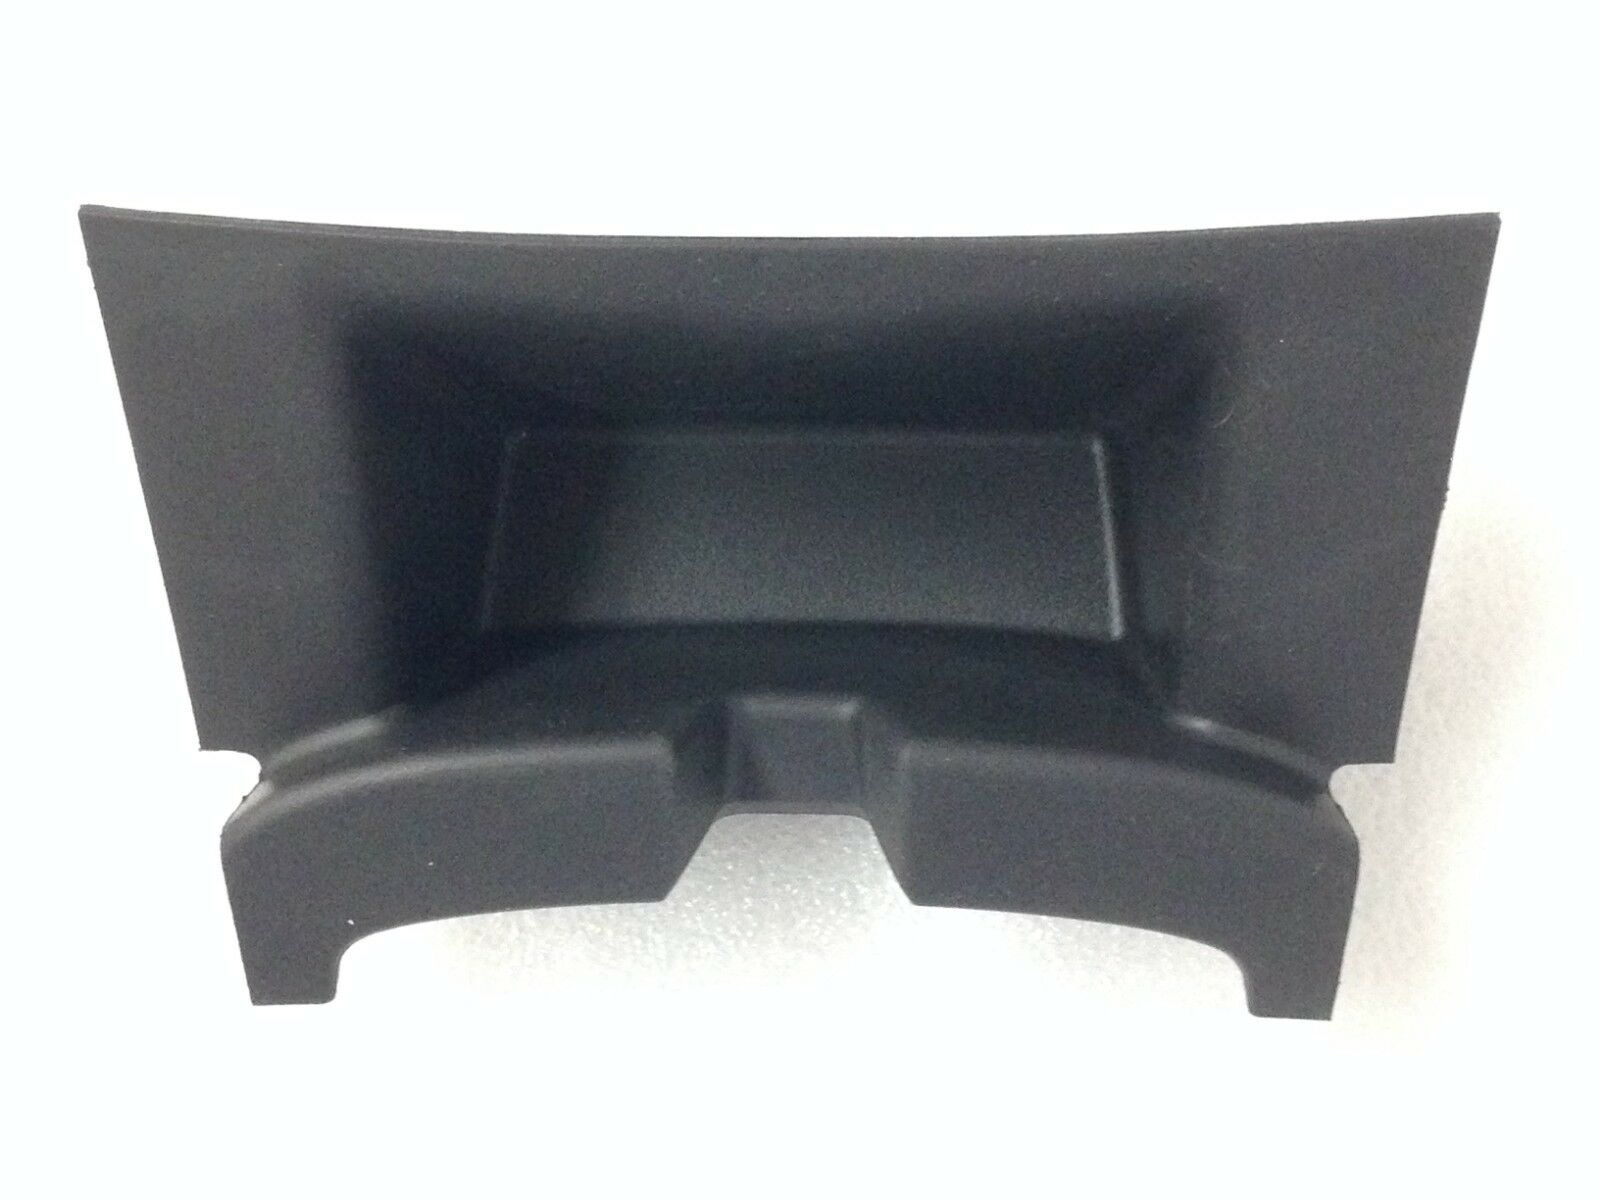 Chevy Impala 2014+ console grab handle insert NEW